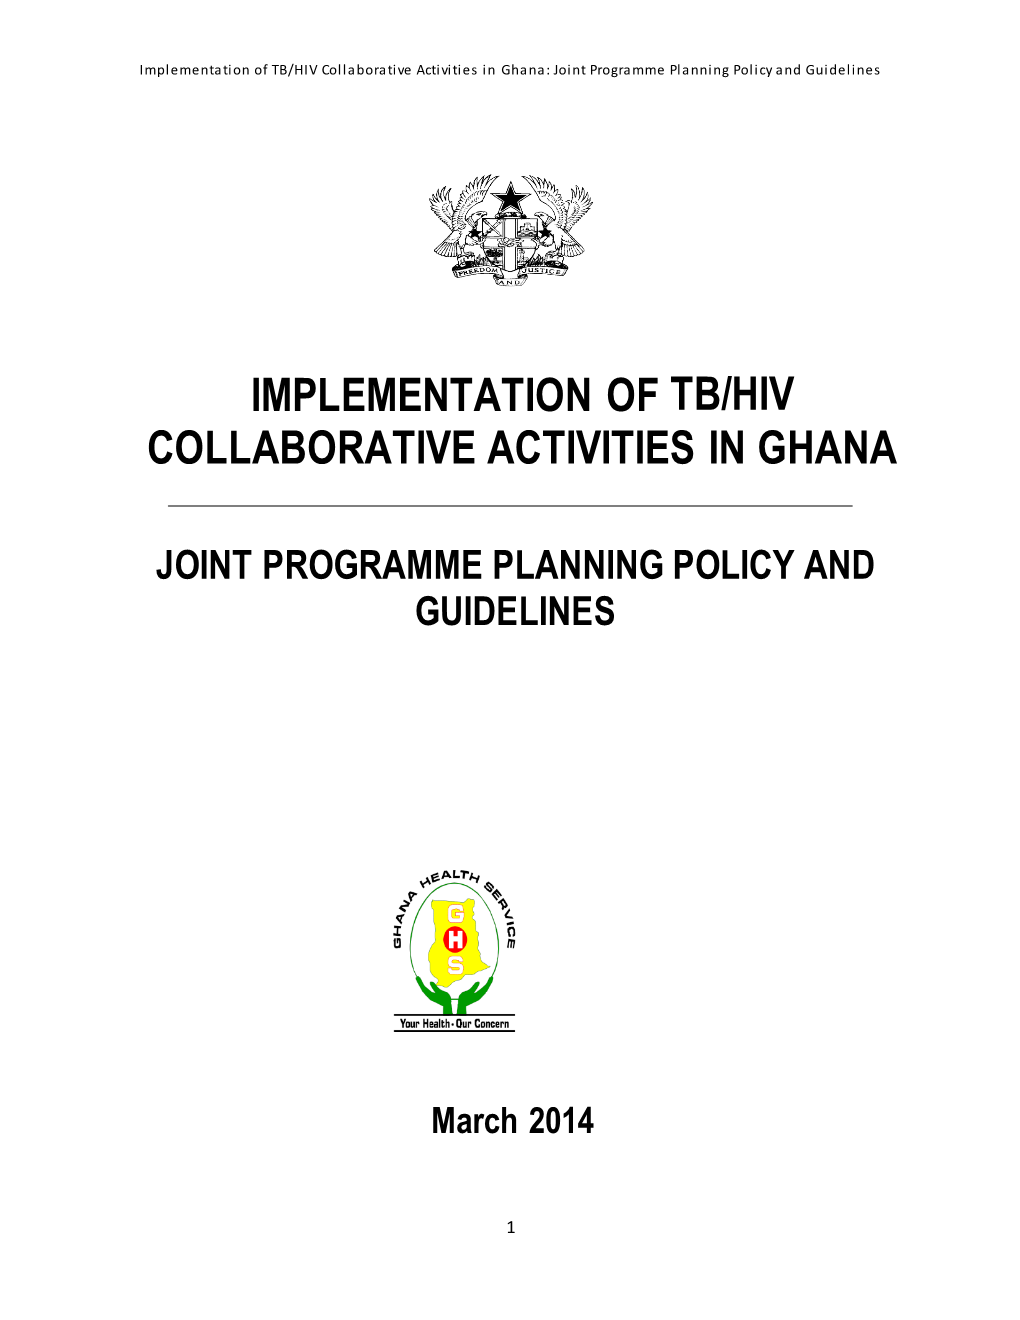 Implementation of TB/HIV Collaborative Activities in Ghana: Joint Programme Planning Policy and Guidelines